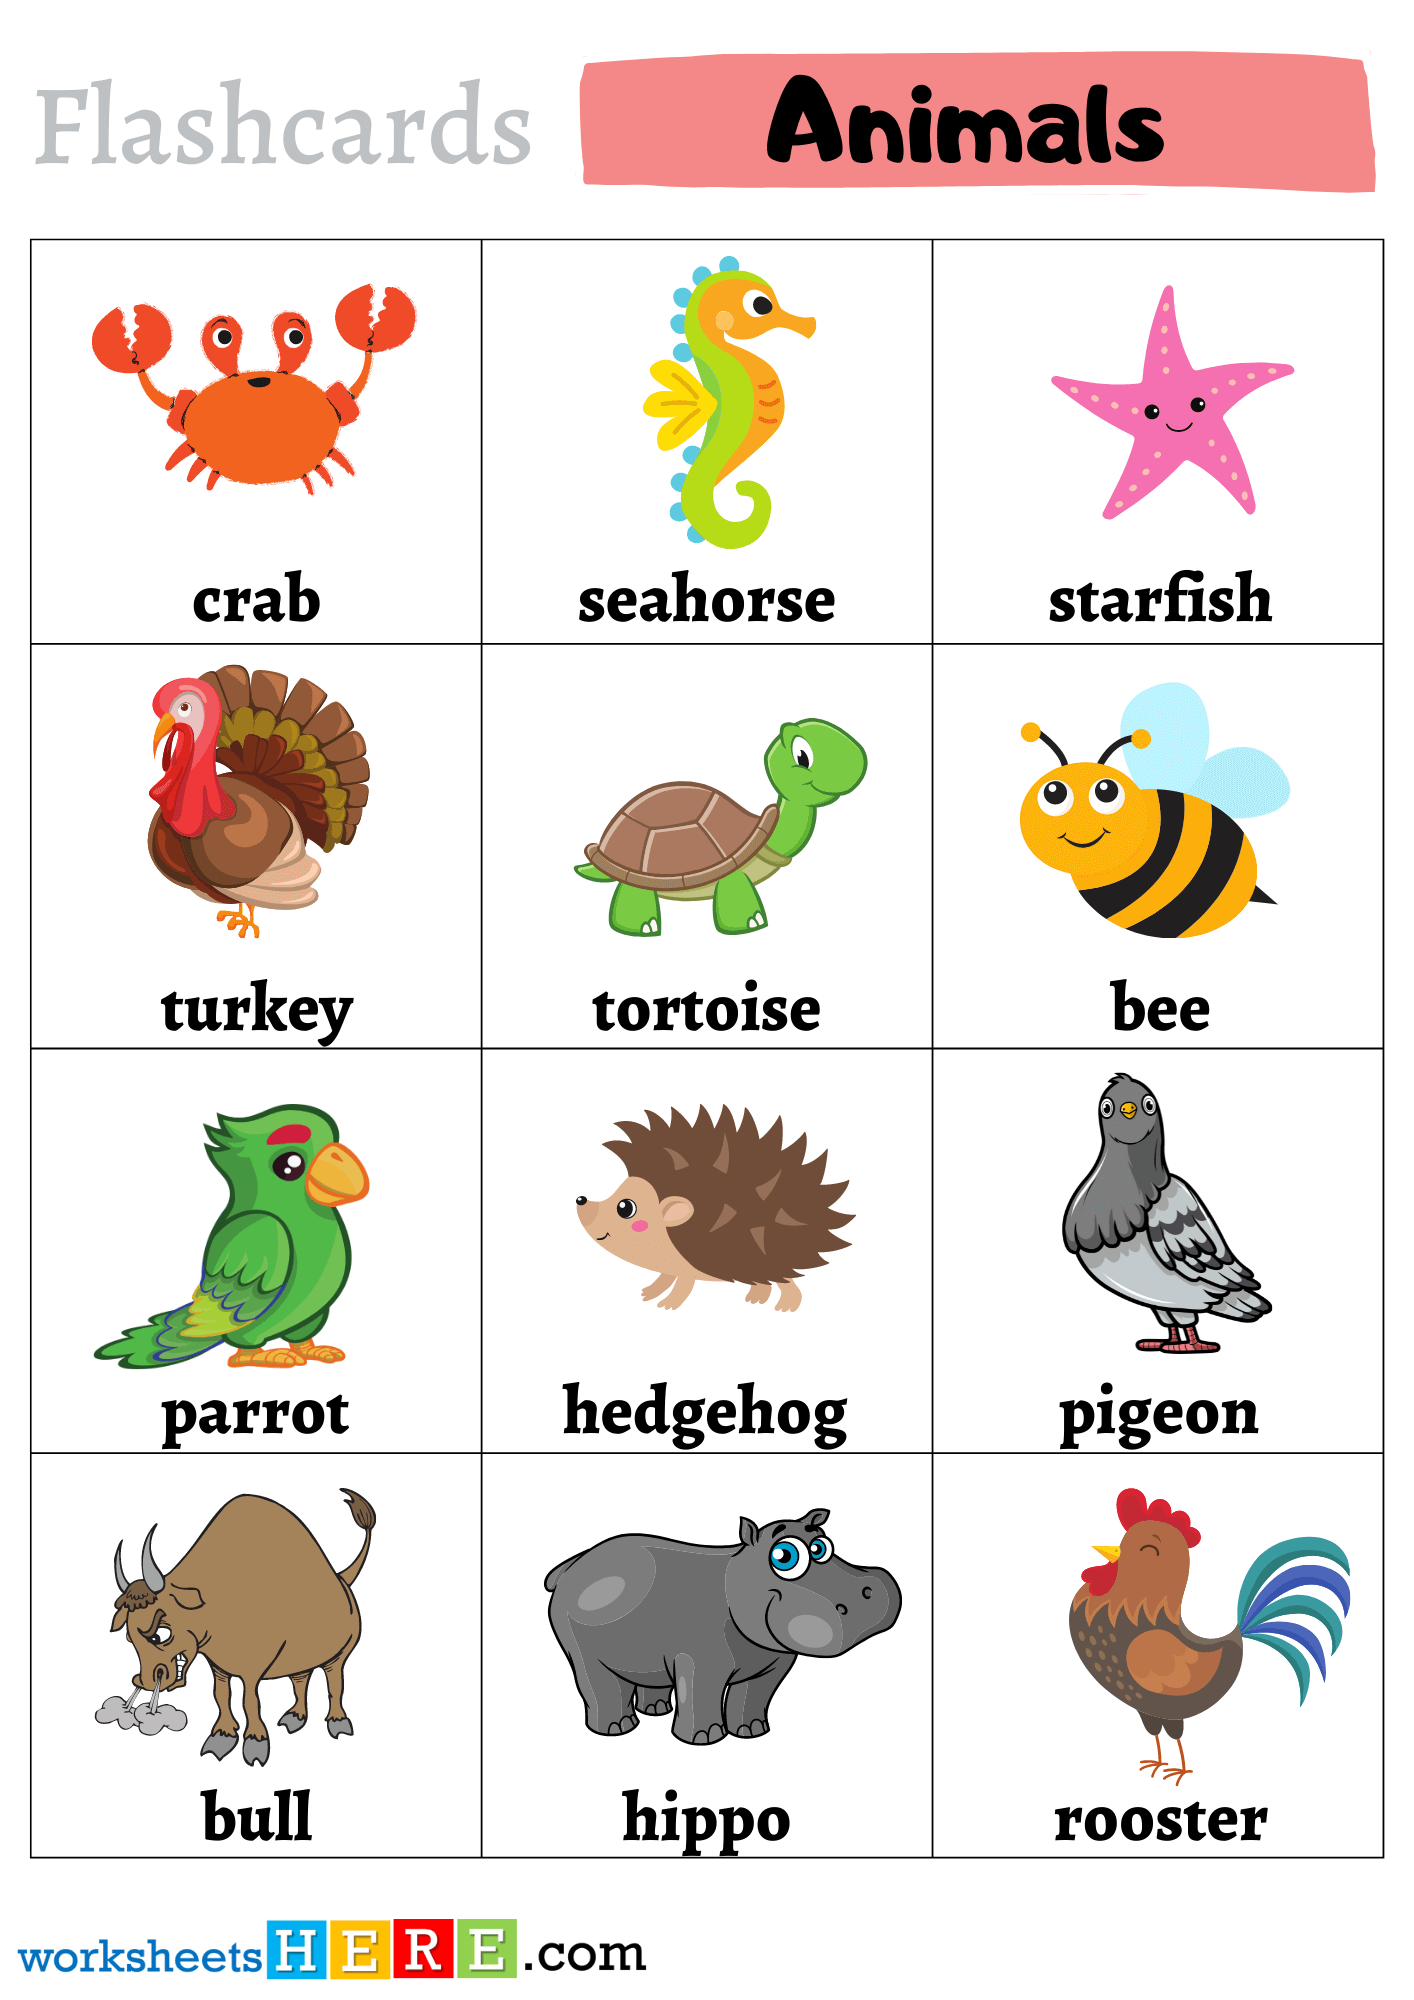 +70 Animals Names with Pictures Flashcards Worksheet, Pdf Flashcards For Kids